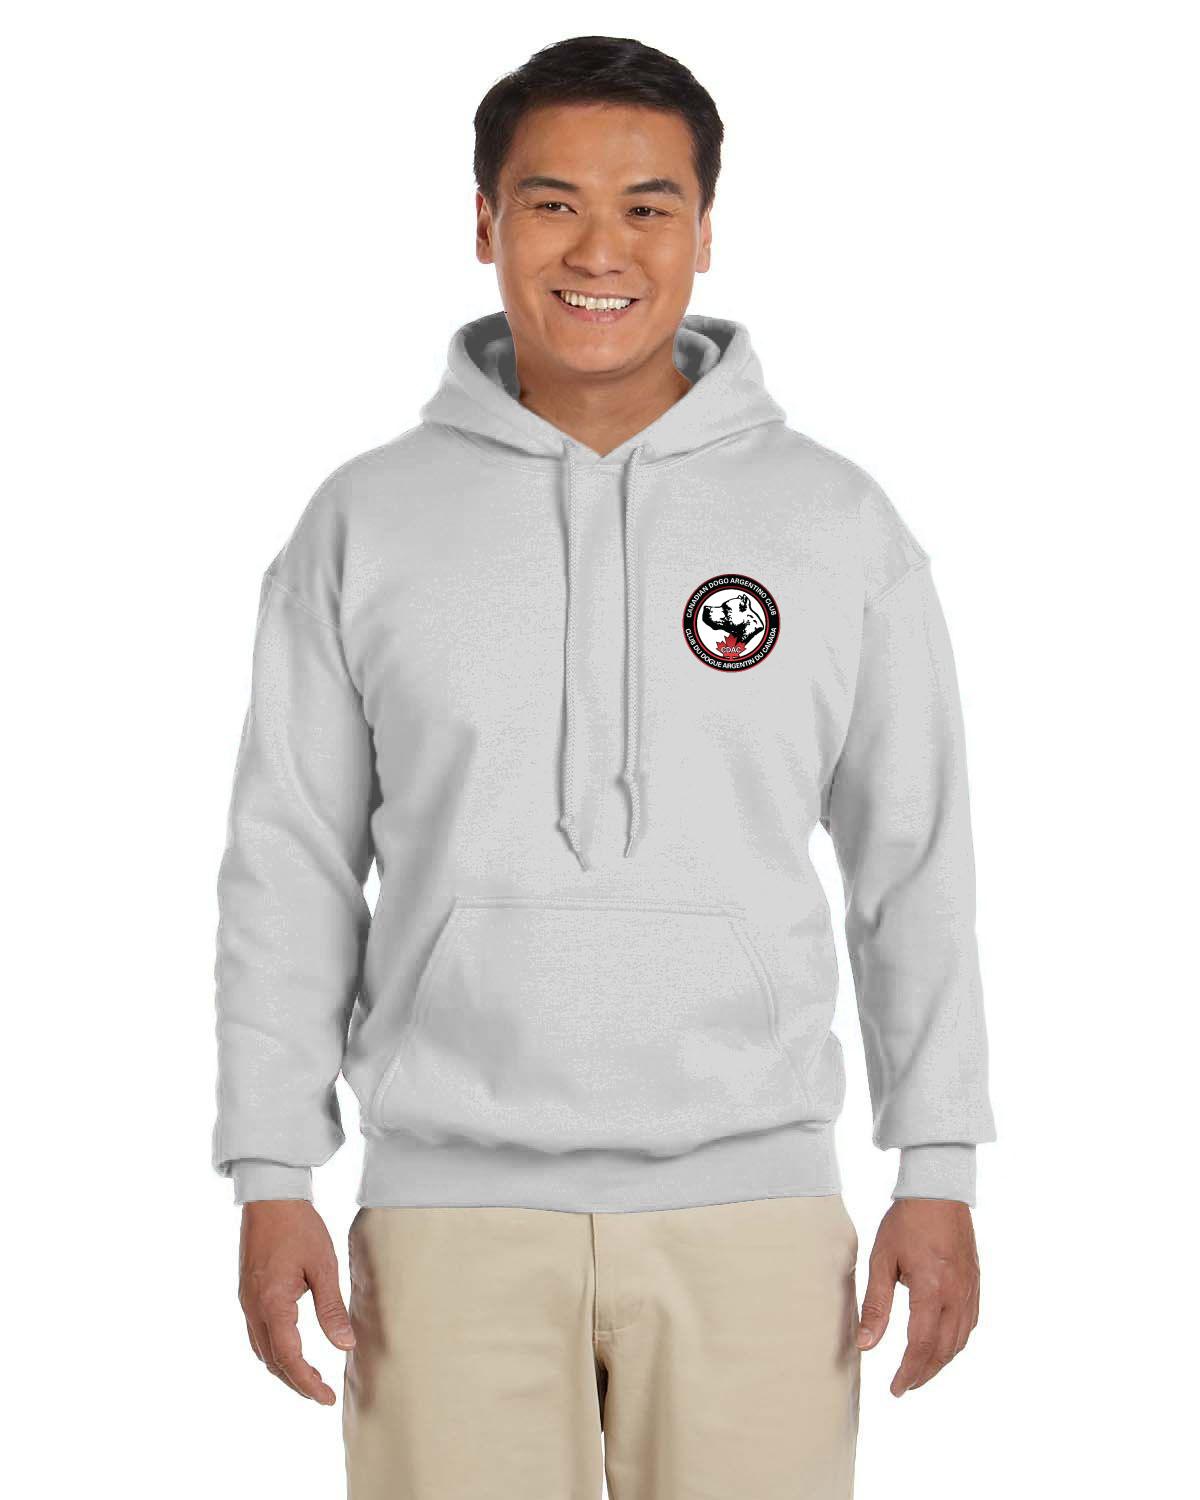 CDAC "Passion" Light Coloured Adult Hoodie